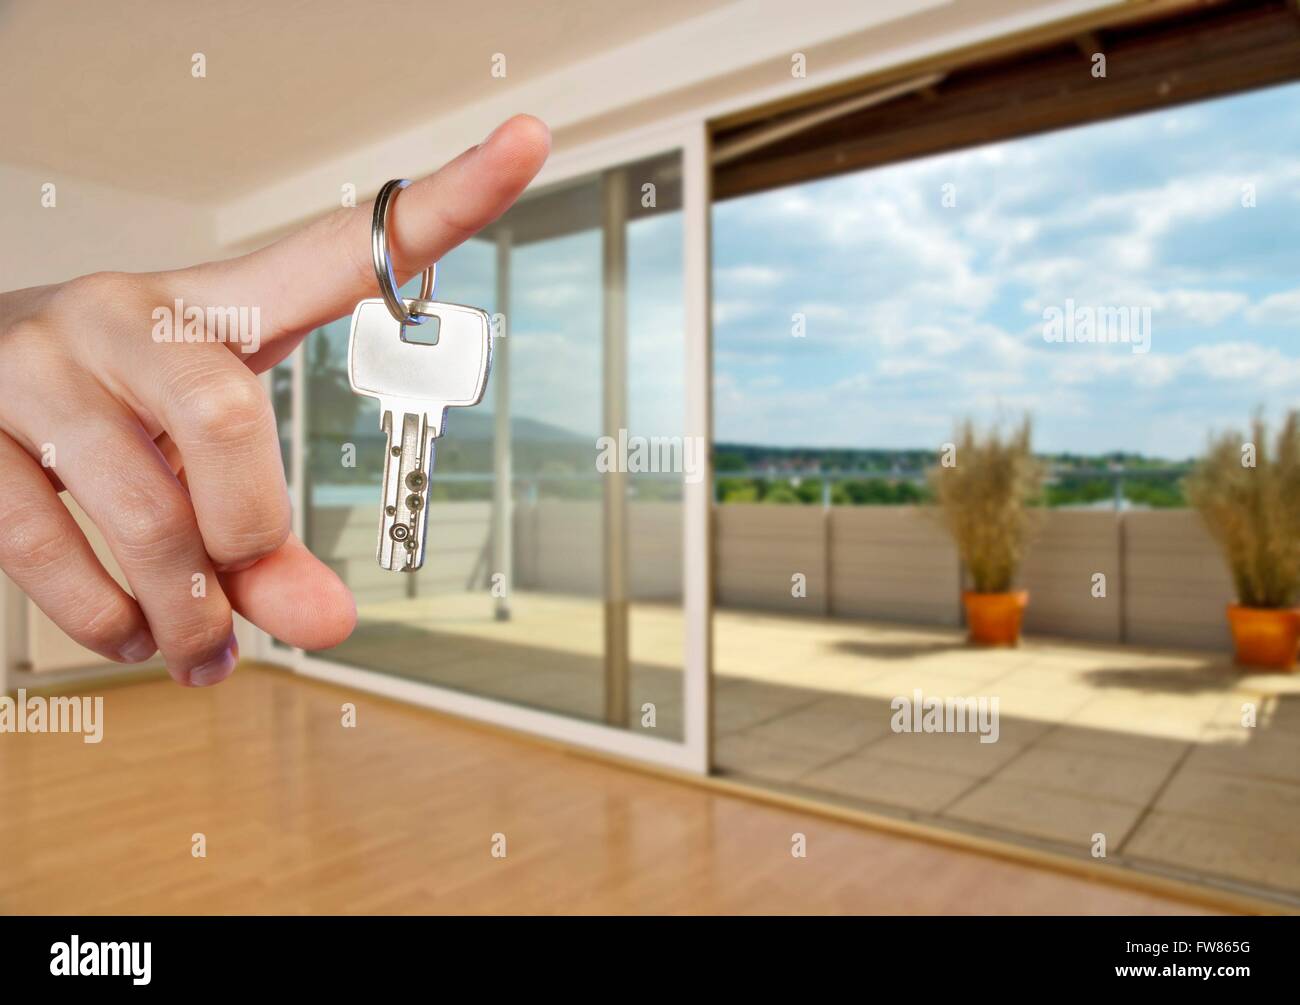 Apartment key on the finger of a hand in the interior of an empty apartment. Stock Photo